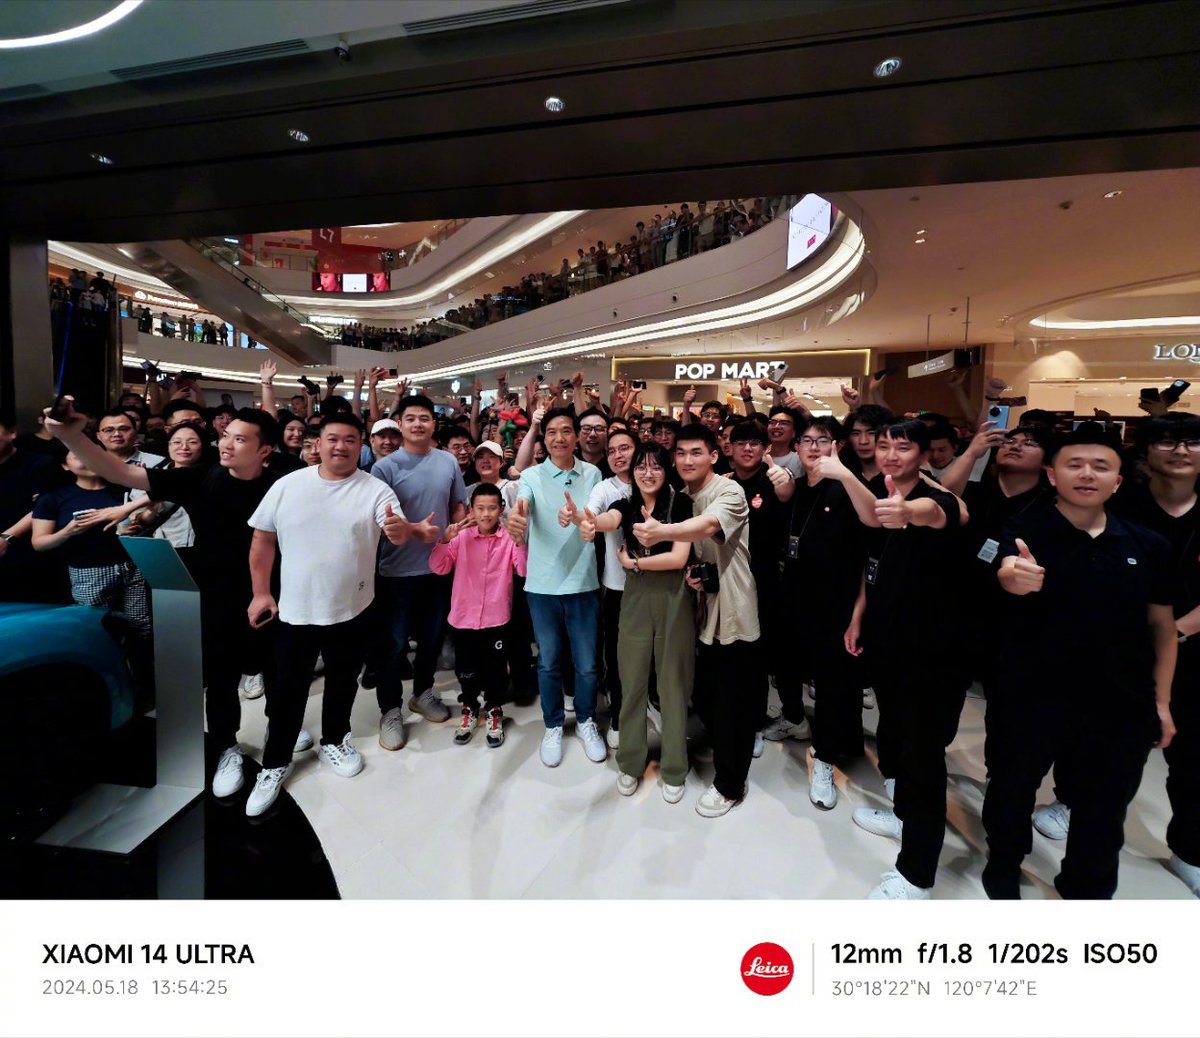 Had a fantastic visit to our Xiaomi EV stores in Hangzhou today. We've now opened five locations here. I'm also proud that Hangzhou is the top-selling city for Xiaomi SU7 in the domestic market. Thank you, Hangzhou, for the warm welcome!